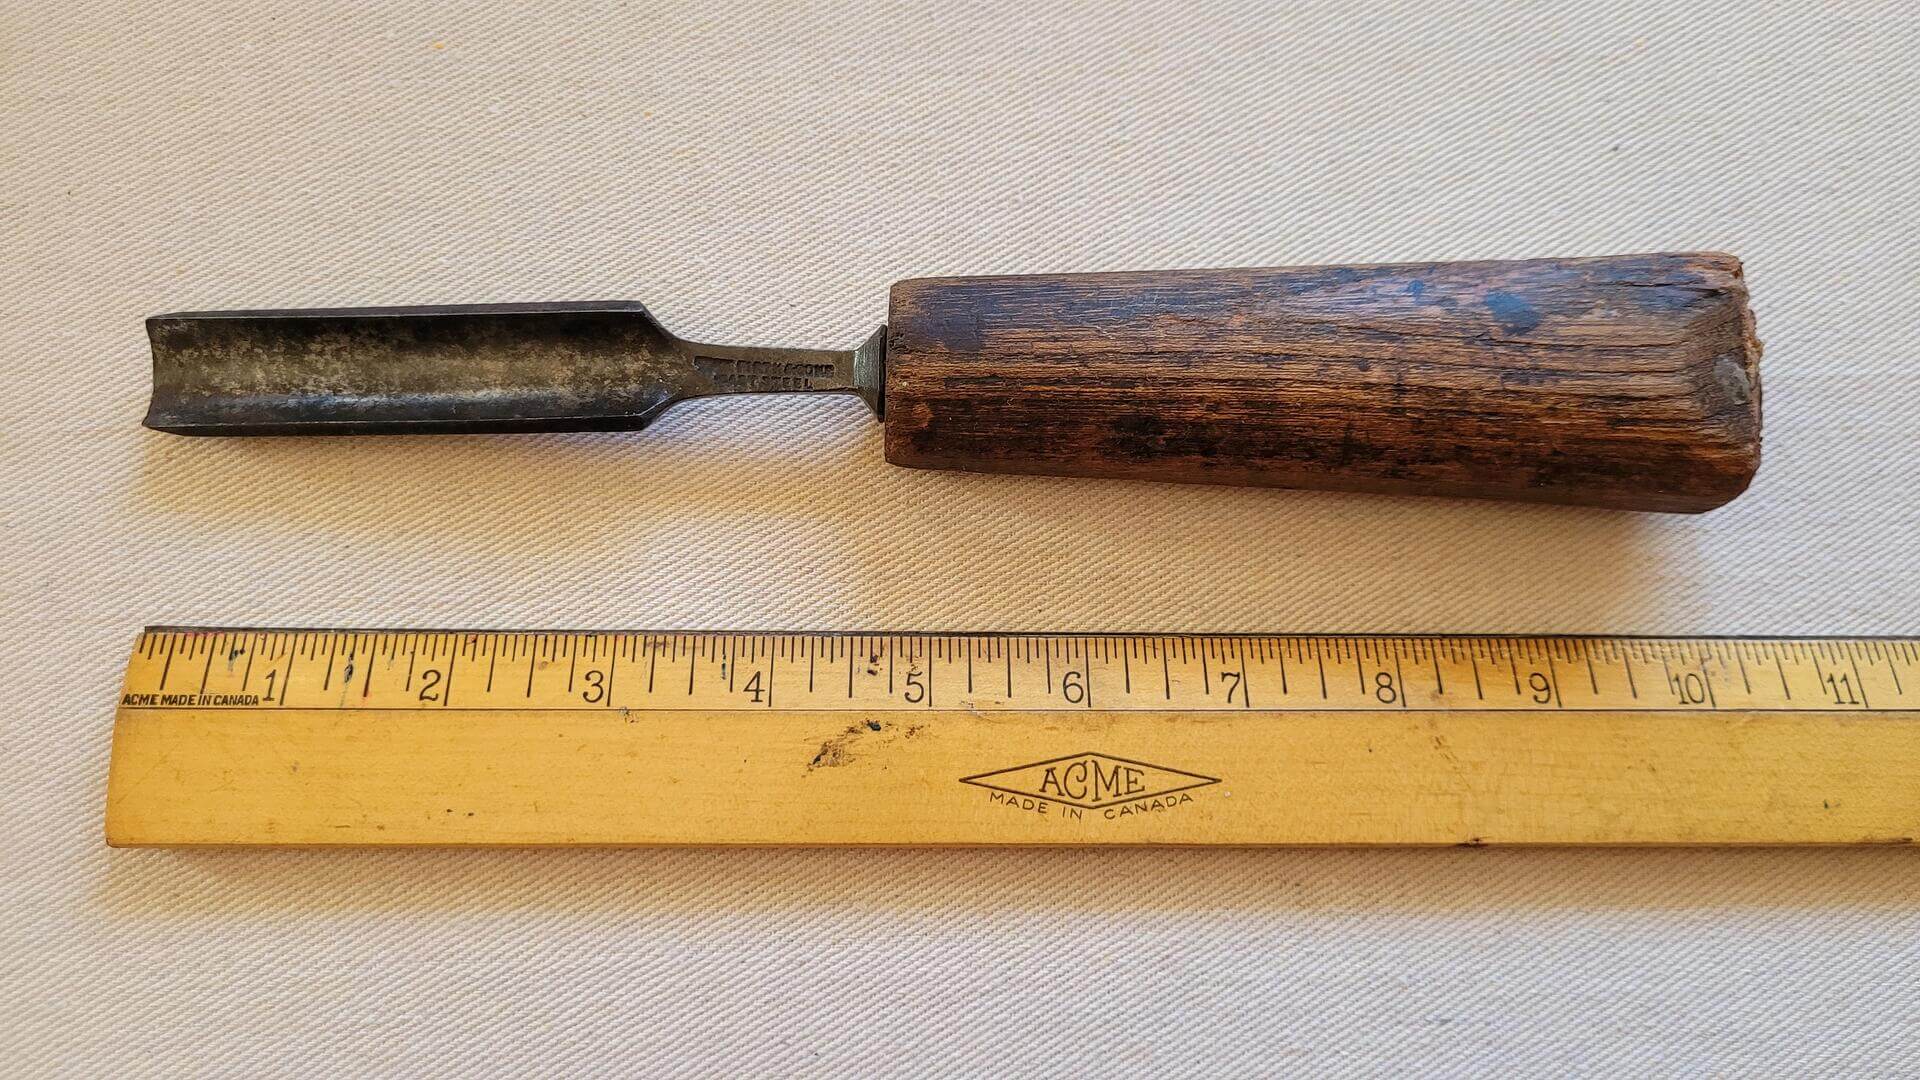 Rare vintage Thomas Firth and Sons cast steel carving gauge chisel with wooden handle. Early 20th century antique made in Sheffield England collectible carpentry and woodworking edge hand tools